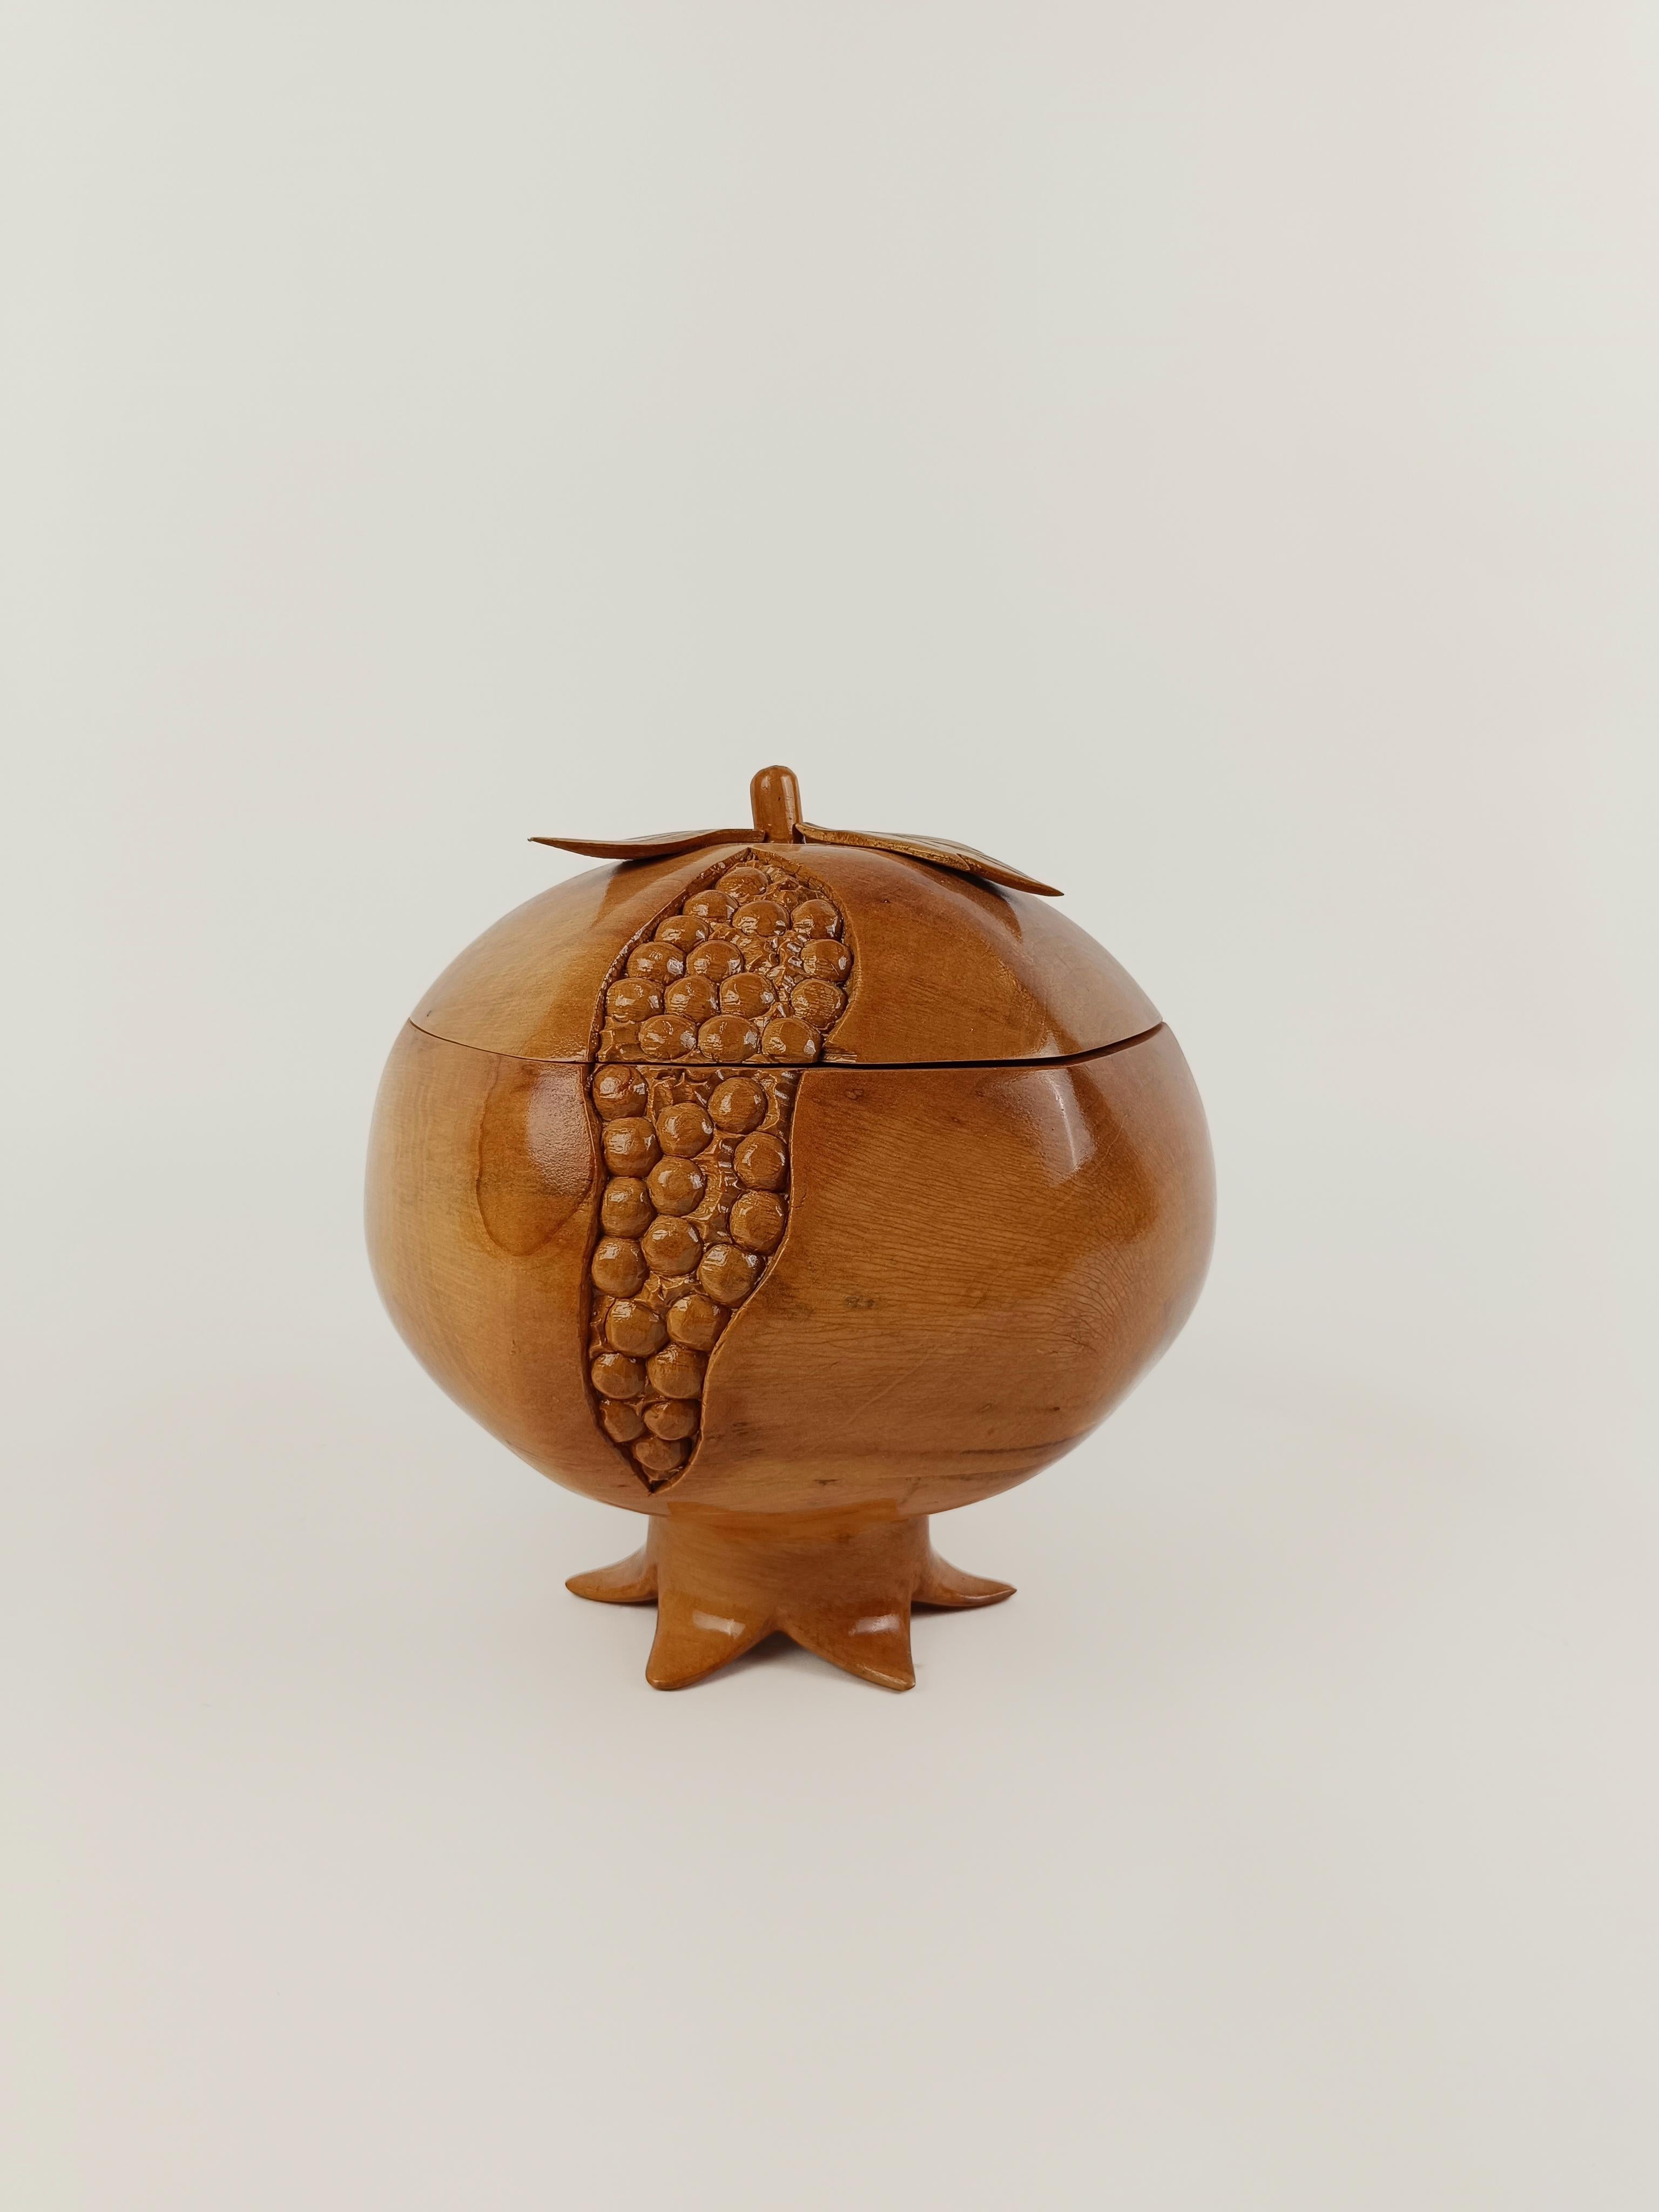 20th Century Sculptural Vintage Ice Bucket in maple wood carved in the shape of a pomegranate